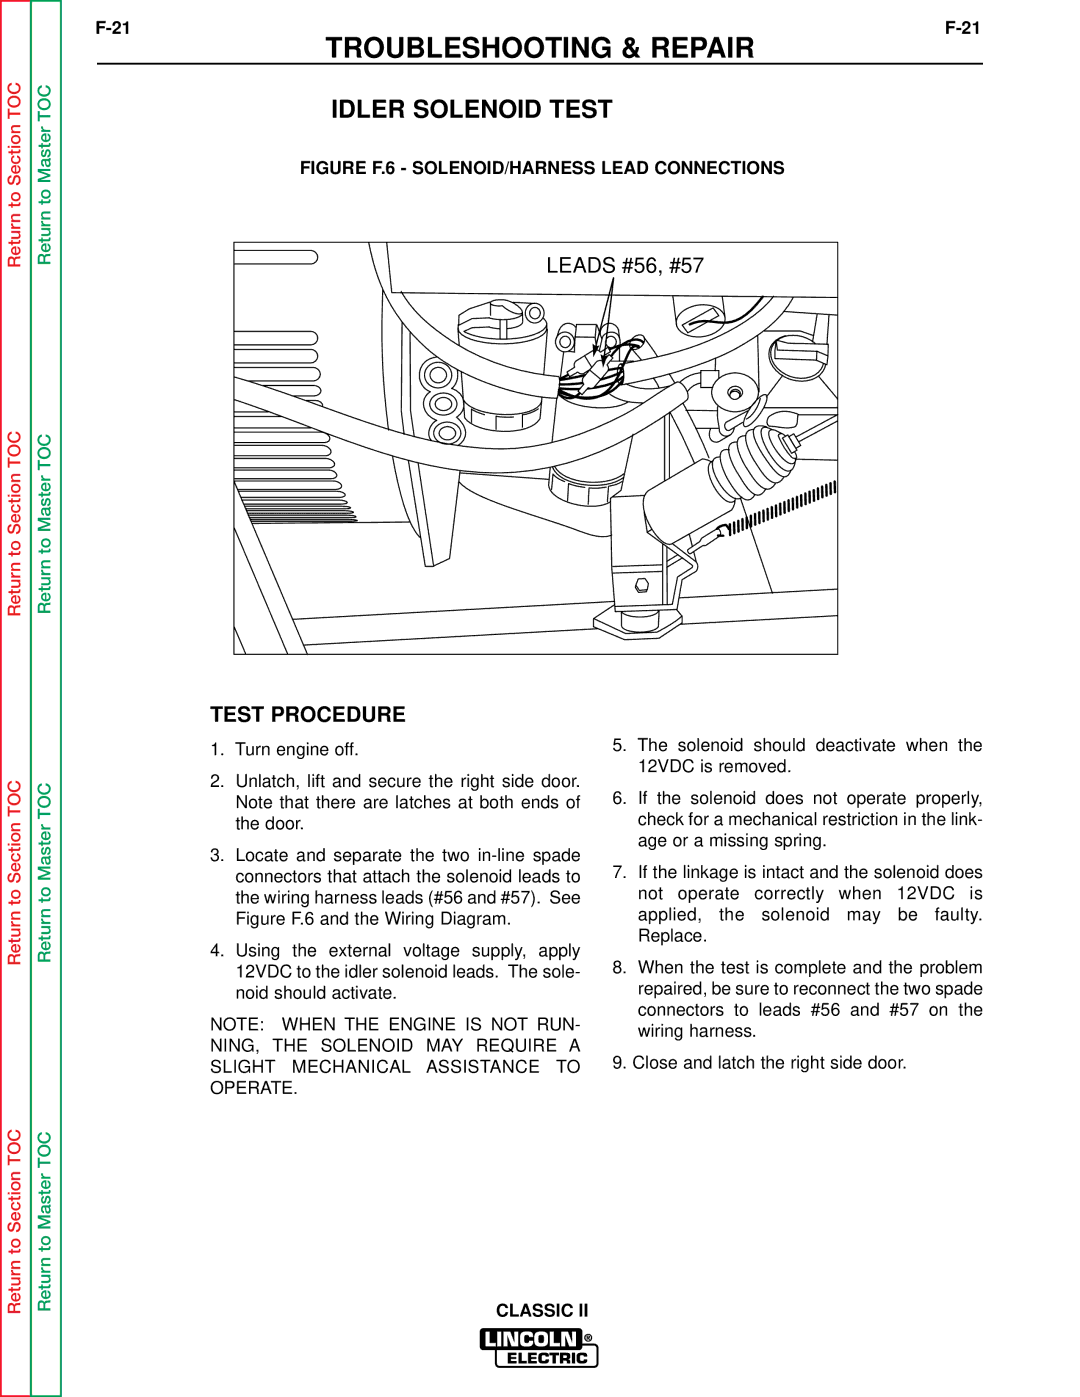 Lincoln Electric SVM125-A service manual Idler Solenoid Test 